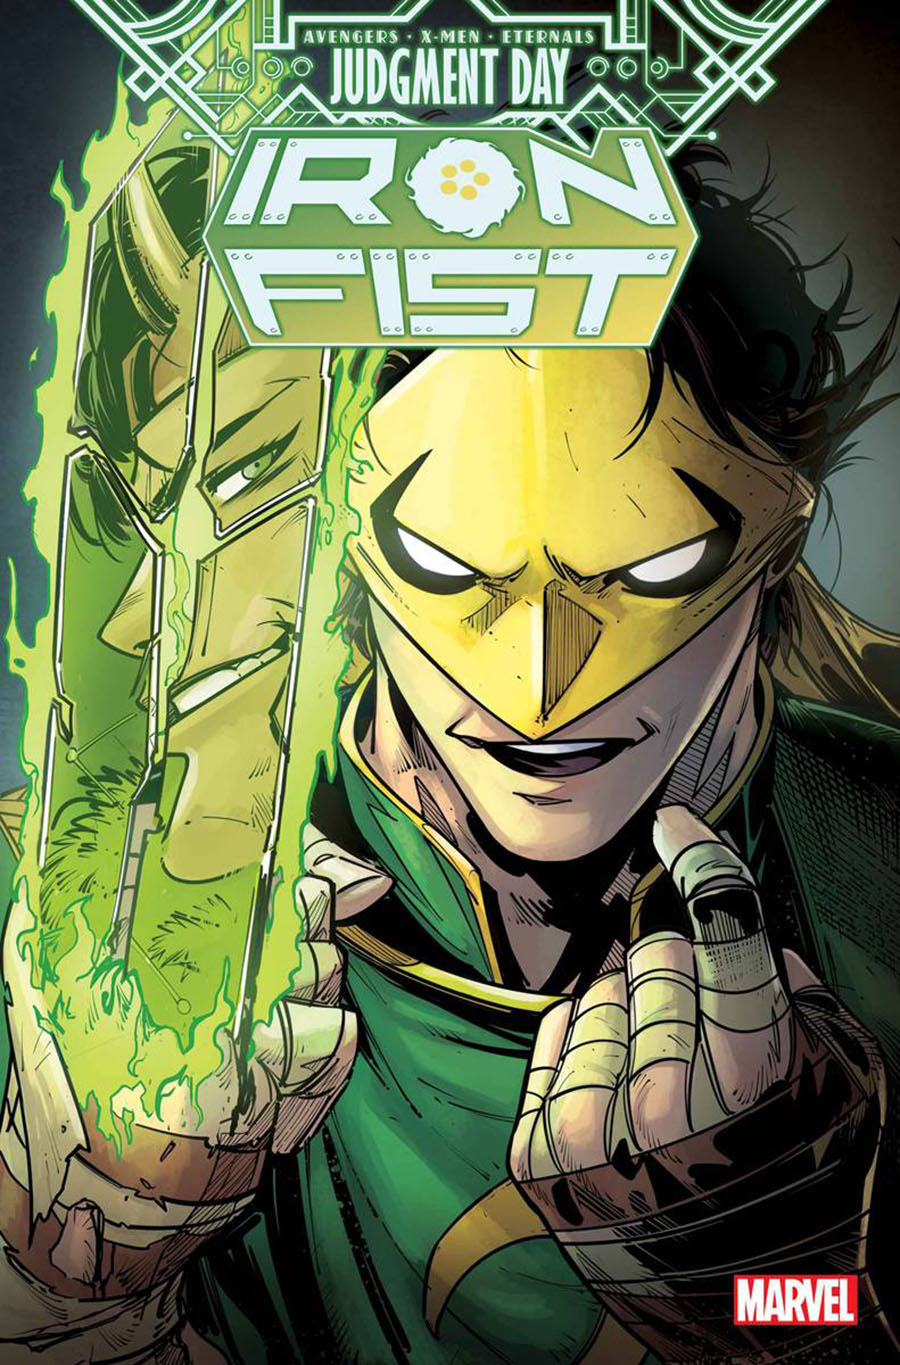 A.X.E. Iron Fist #1 (One Shot) Cover B Variant Michael Yg Cover (A.X.E. Judgment Day Tie-In)